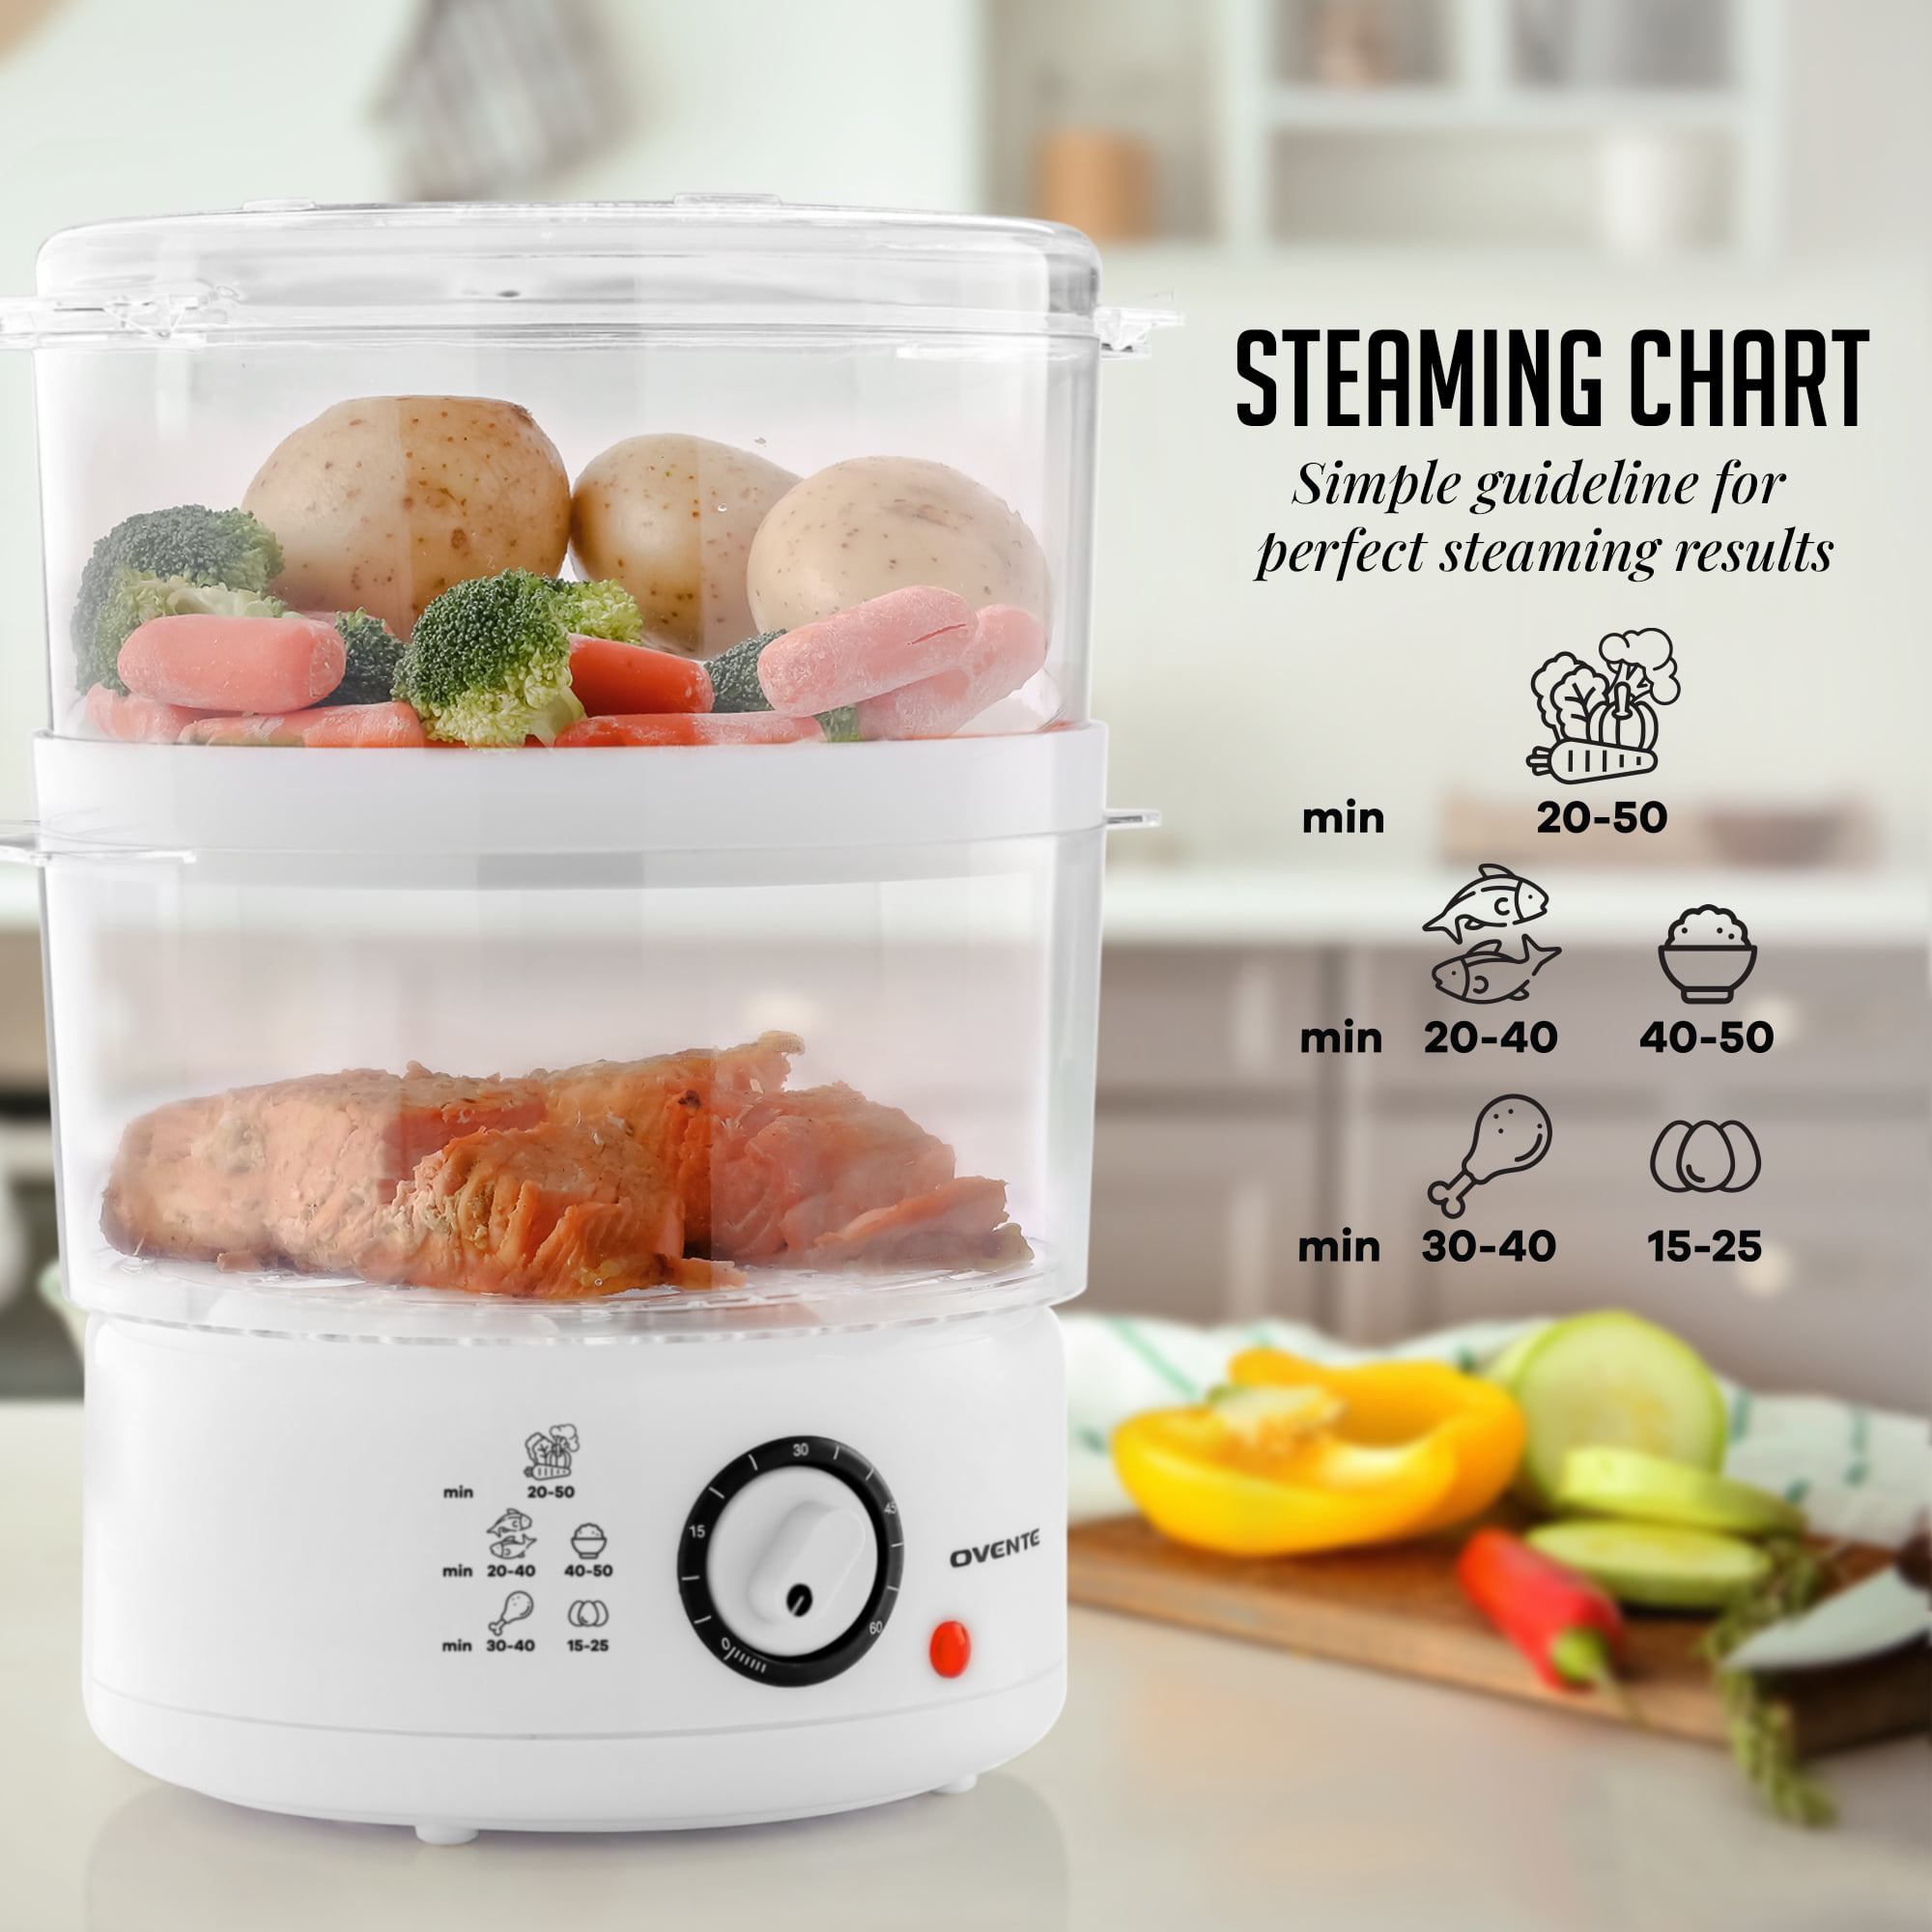 Tips for Choosing An Electric Steamer, Dietary Cookery#